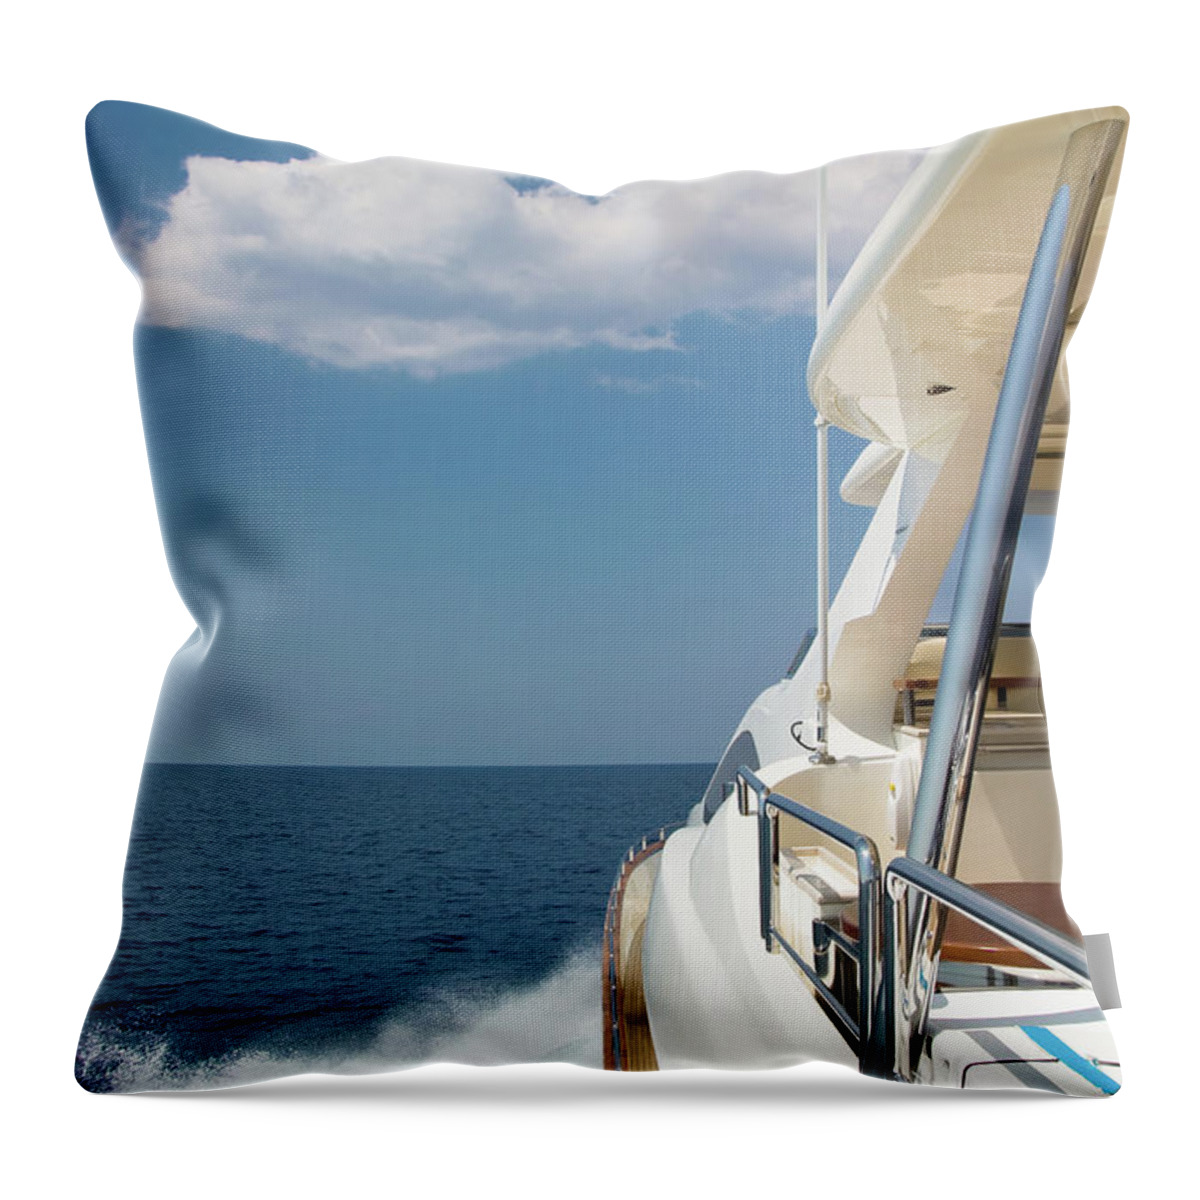 Motorboat Throw Pillow featuring the photograph Luxury Yacht Sailing At High Speed by Petreplesea